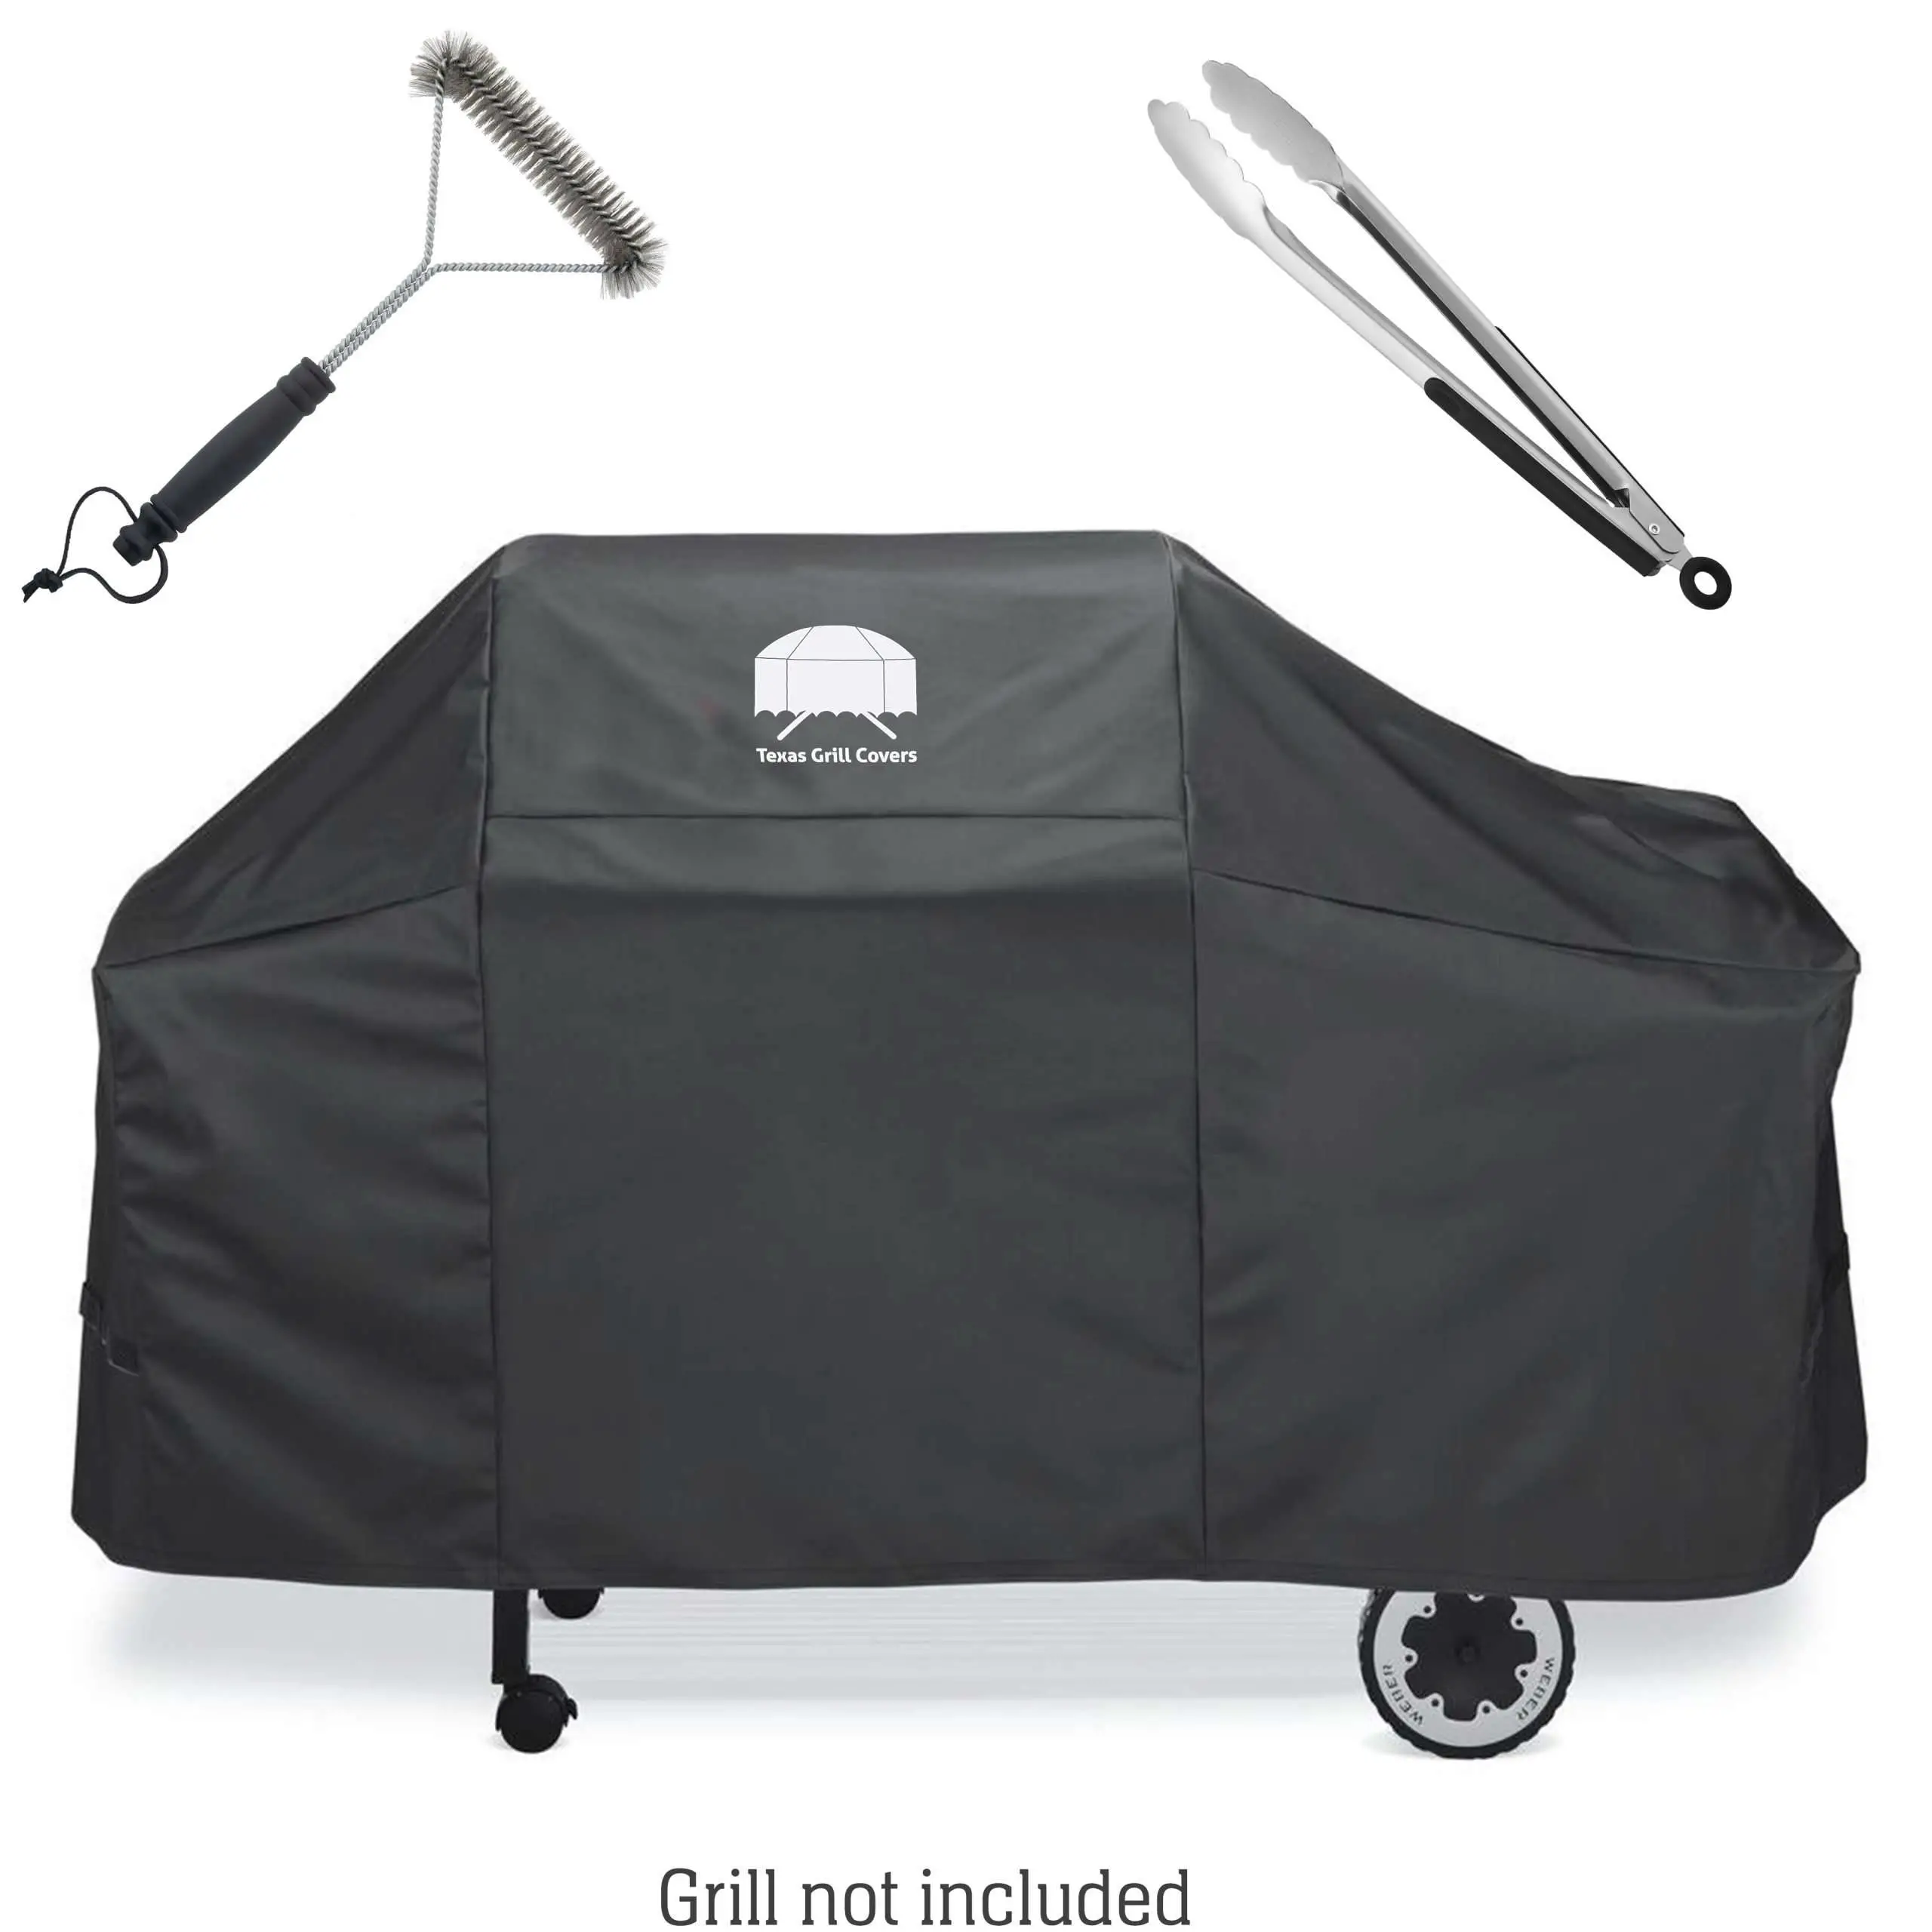 Texas Grill Covers 7552 Premium Cover for Weber Genesis ...